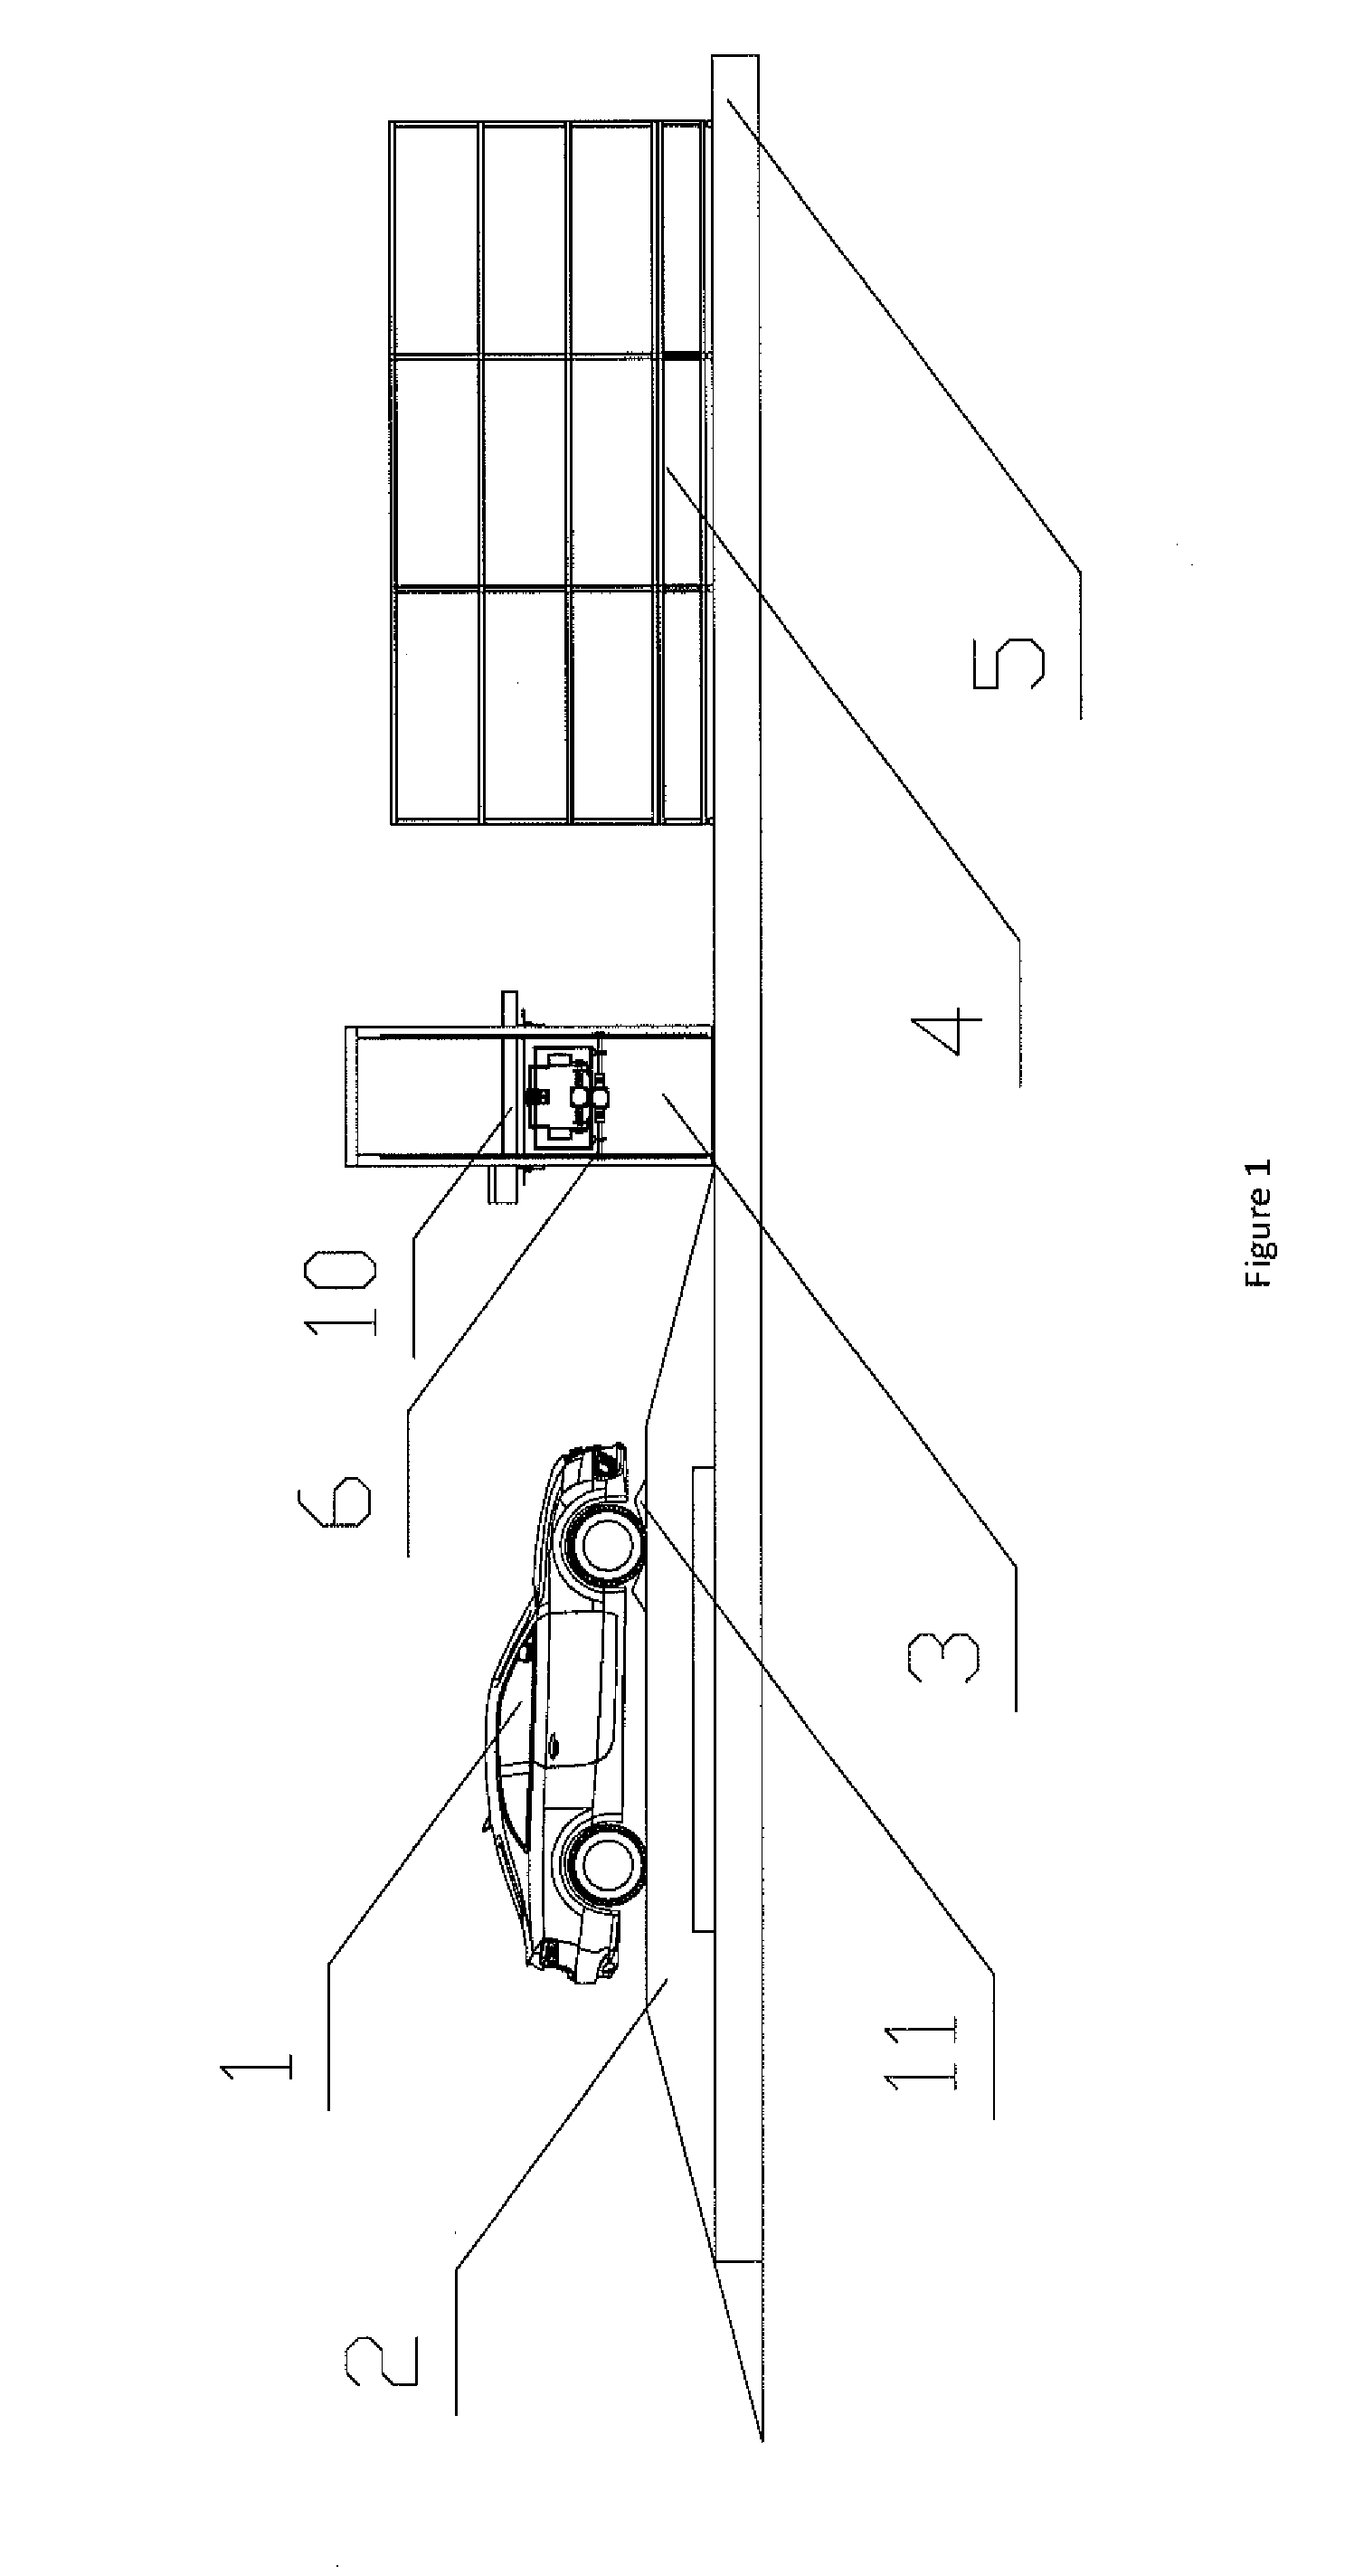 Battery quick-change system for an electric passenger car chassis having a cartesian coordinate robot